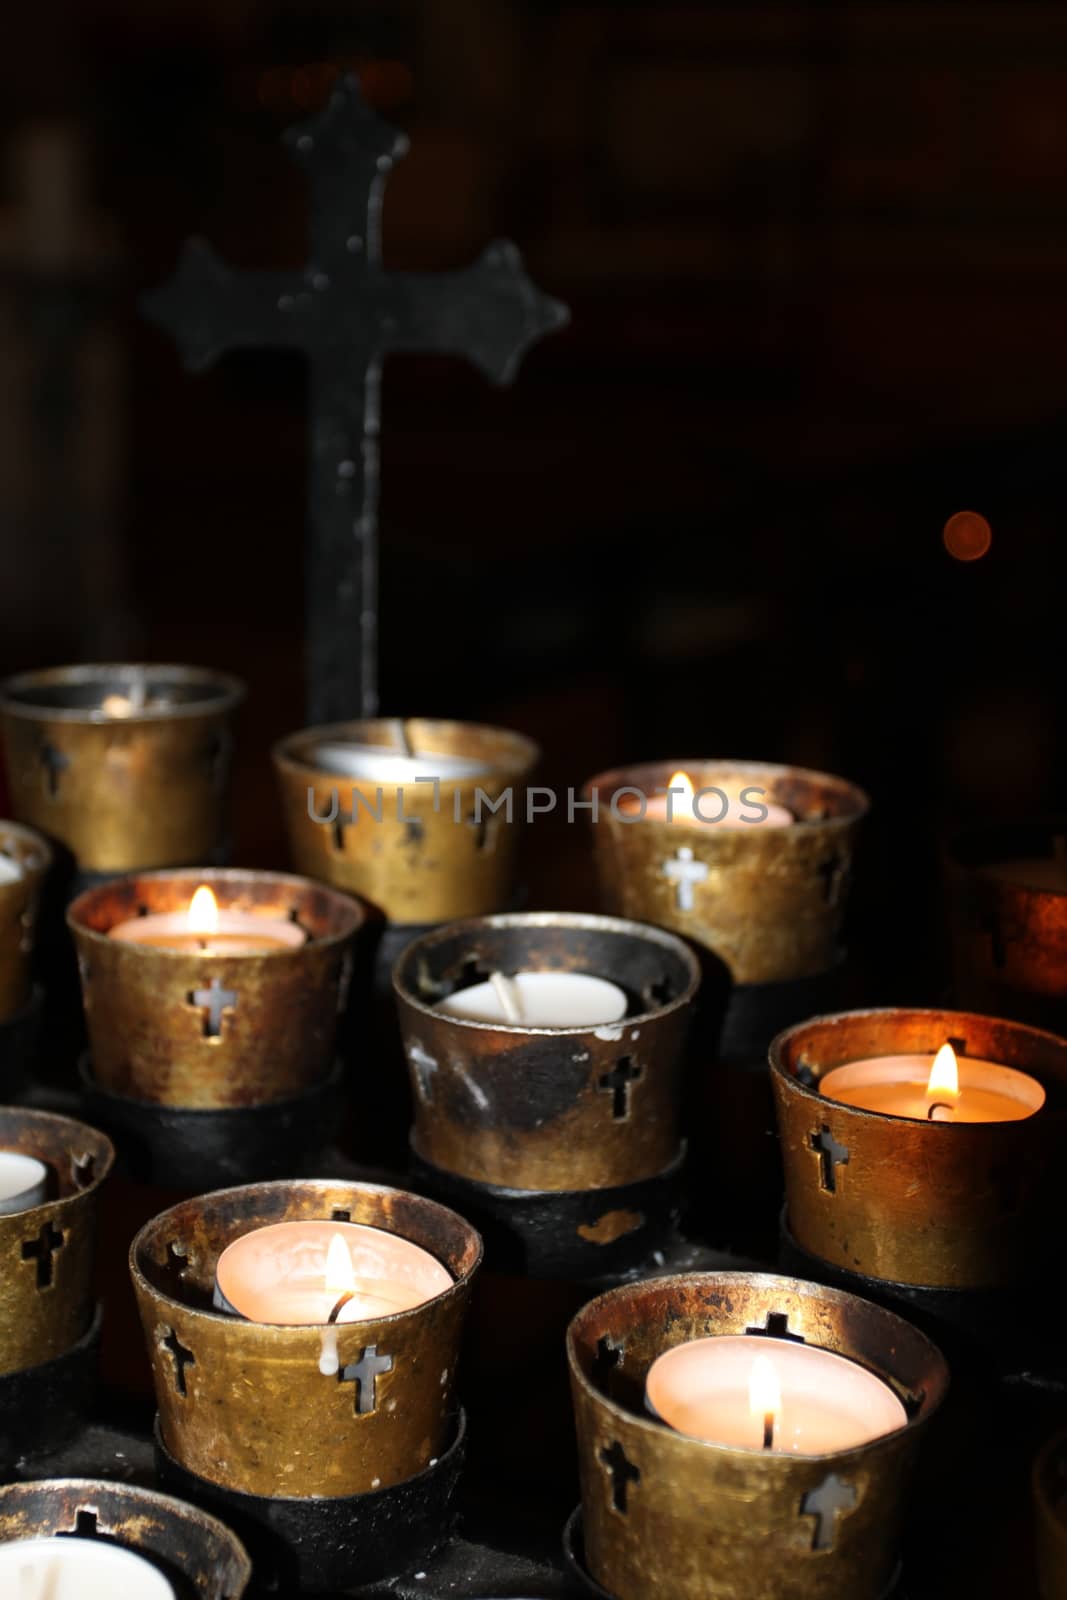 Candles in a church on black background.